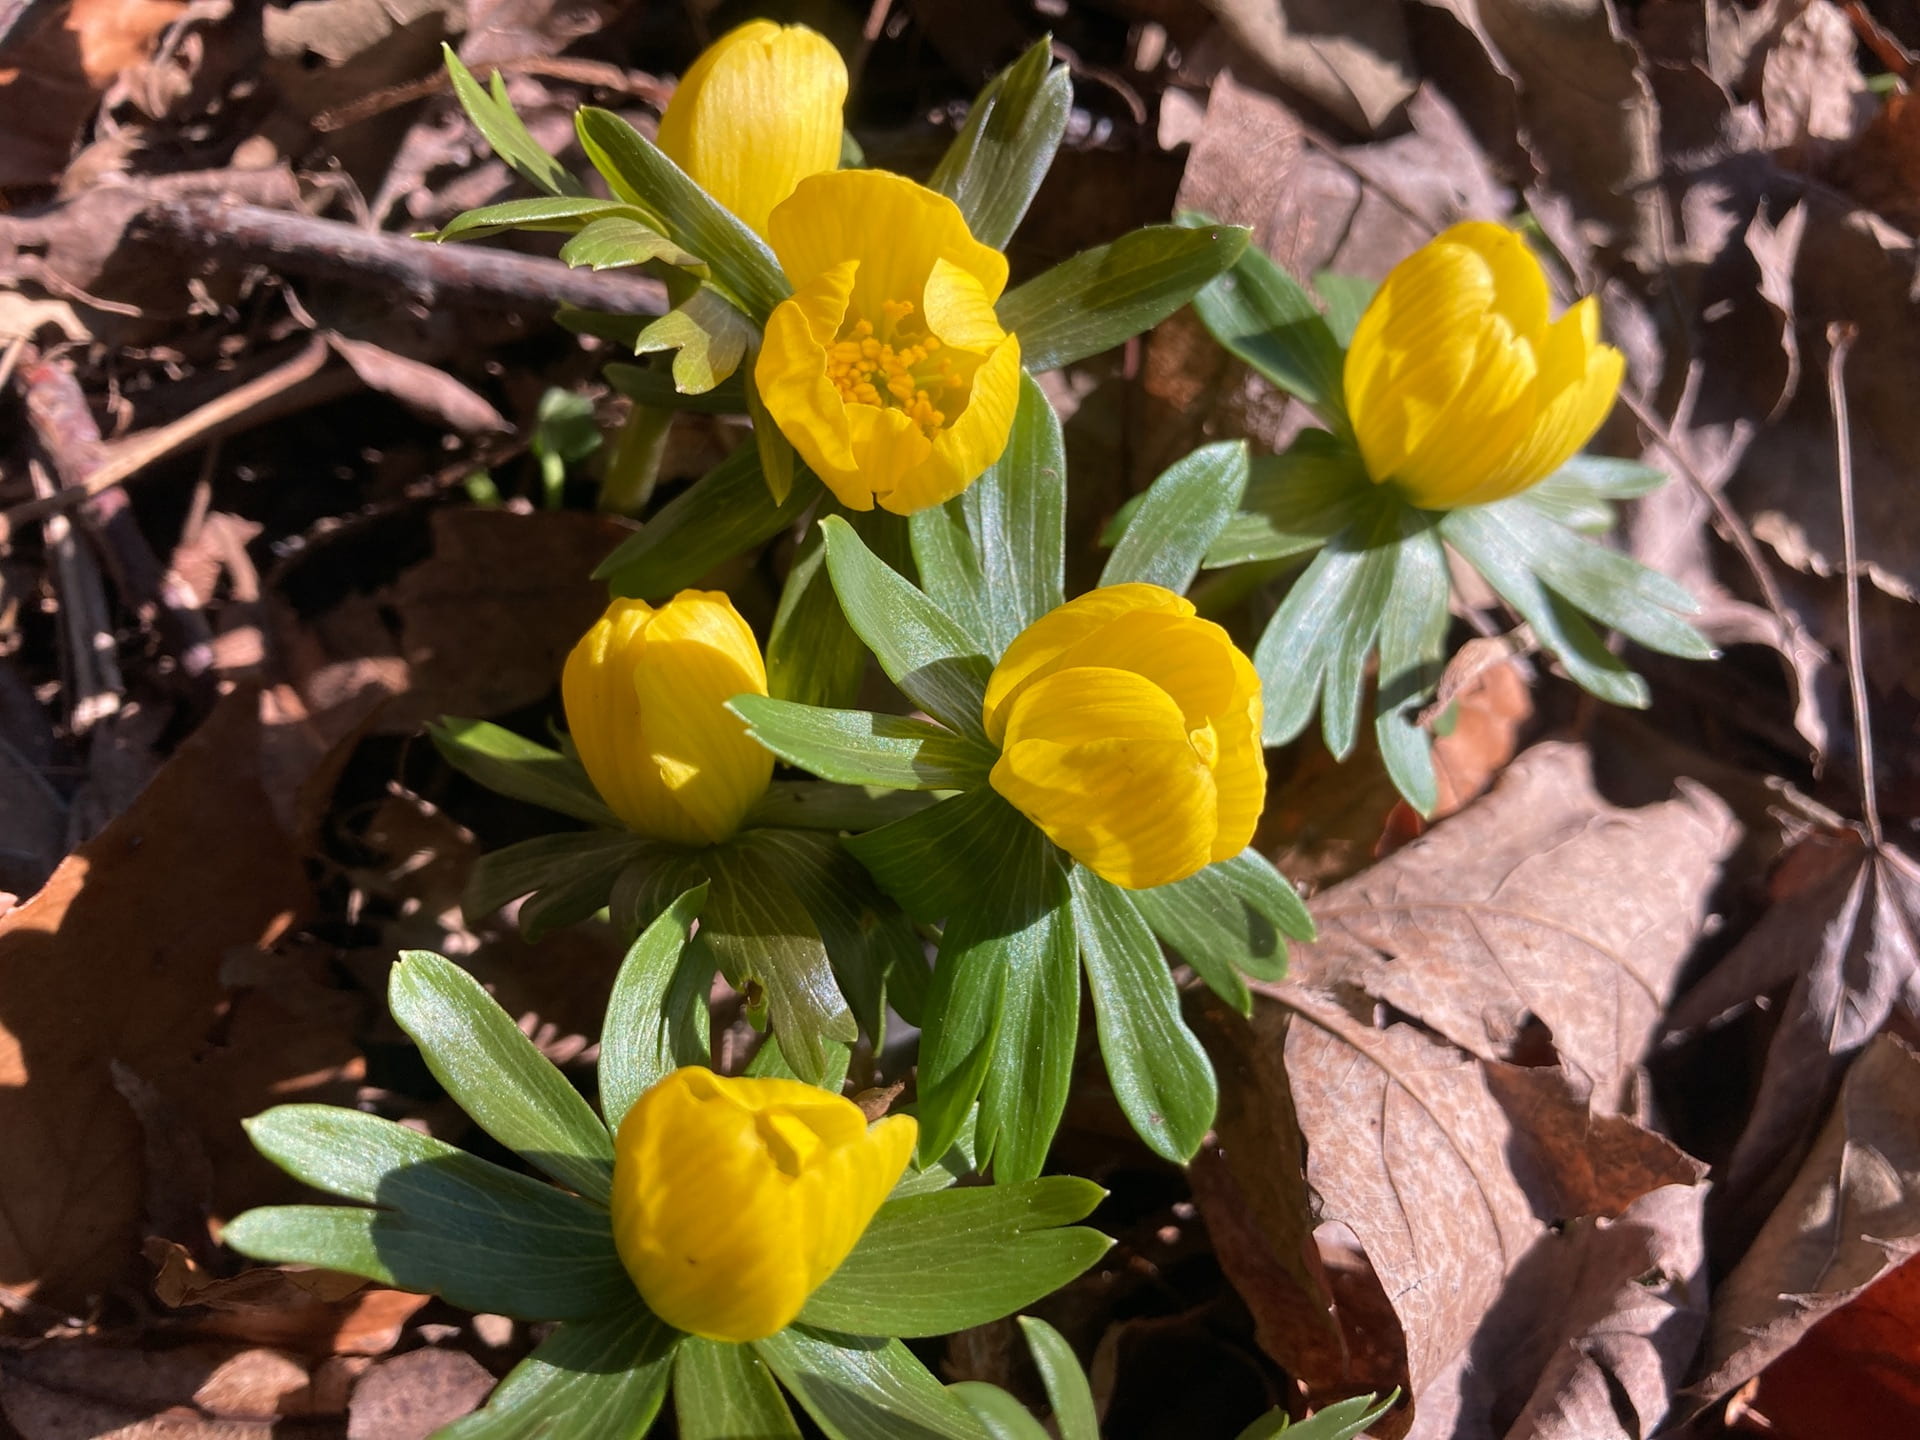 Winter aconite, Eranthis hyemalis, is one of the first bulbs to bloom.